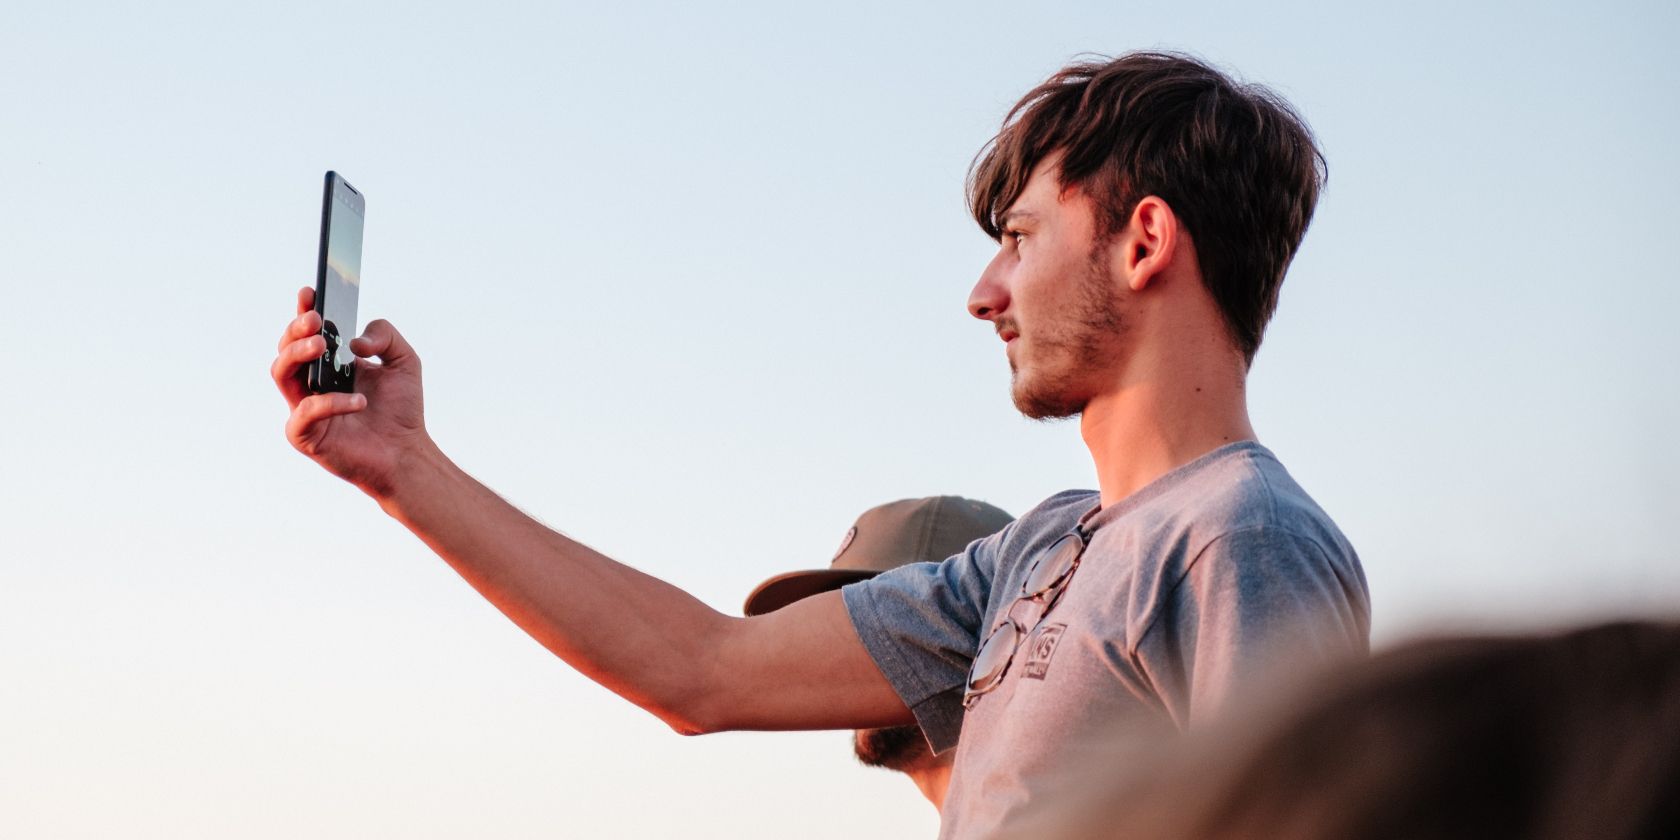 Photo of a person taking a picture around sunset